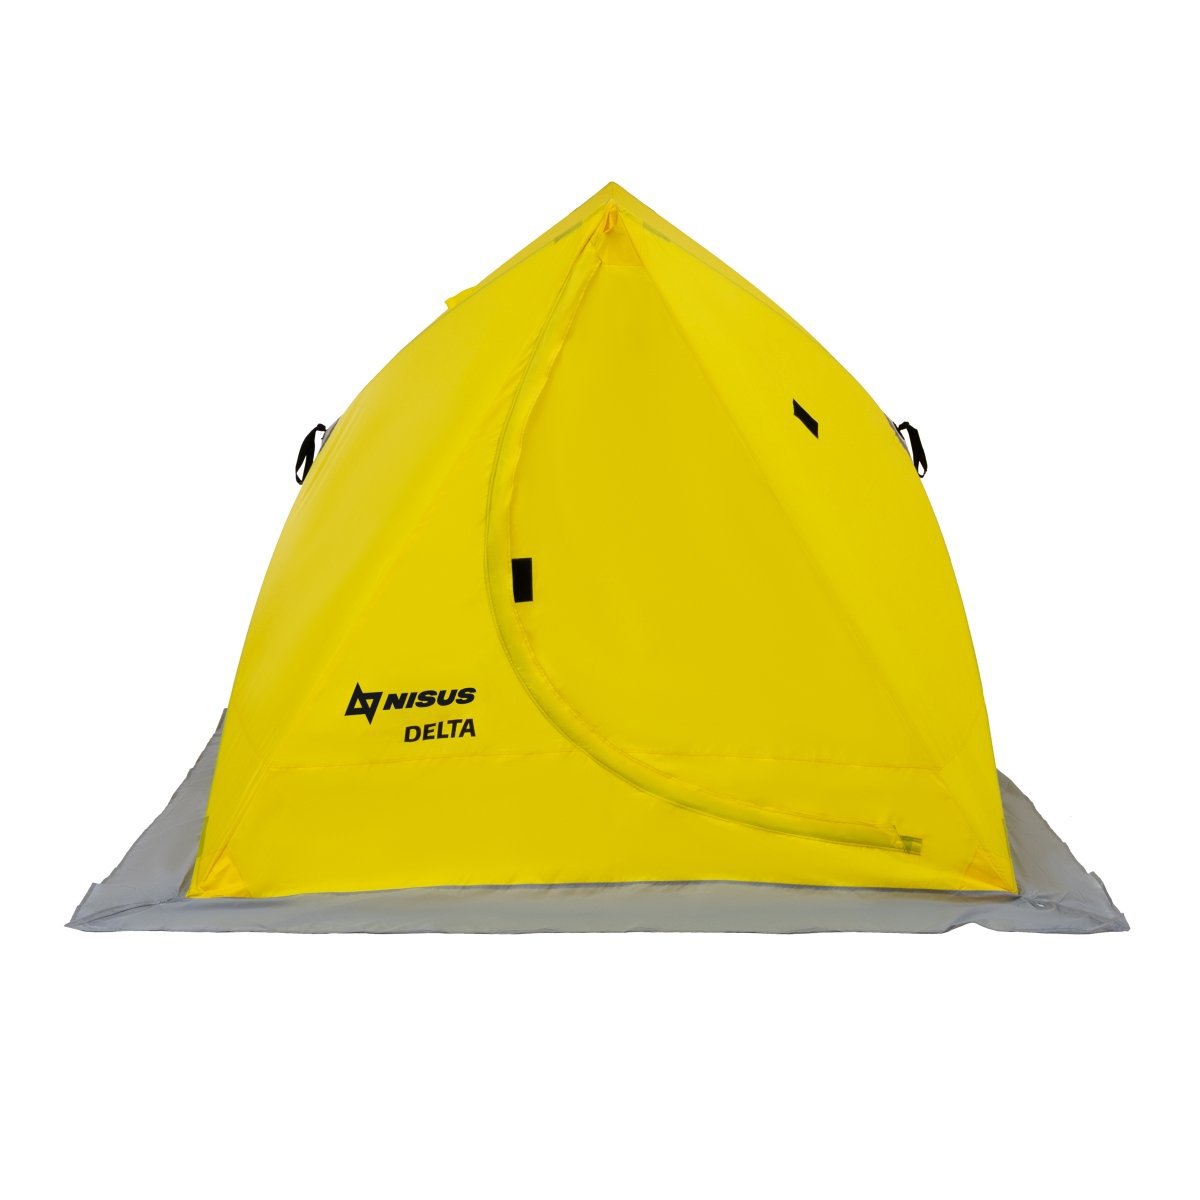 Delta Portable Ice Fishing Tent Shelter for 2 Persons, yellow color